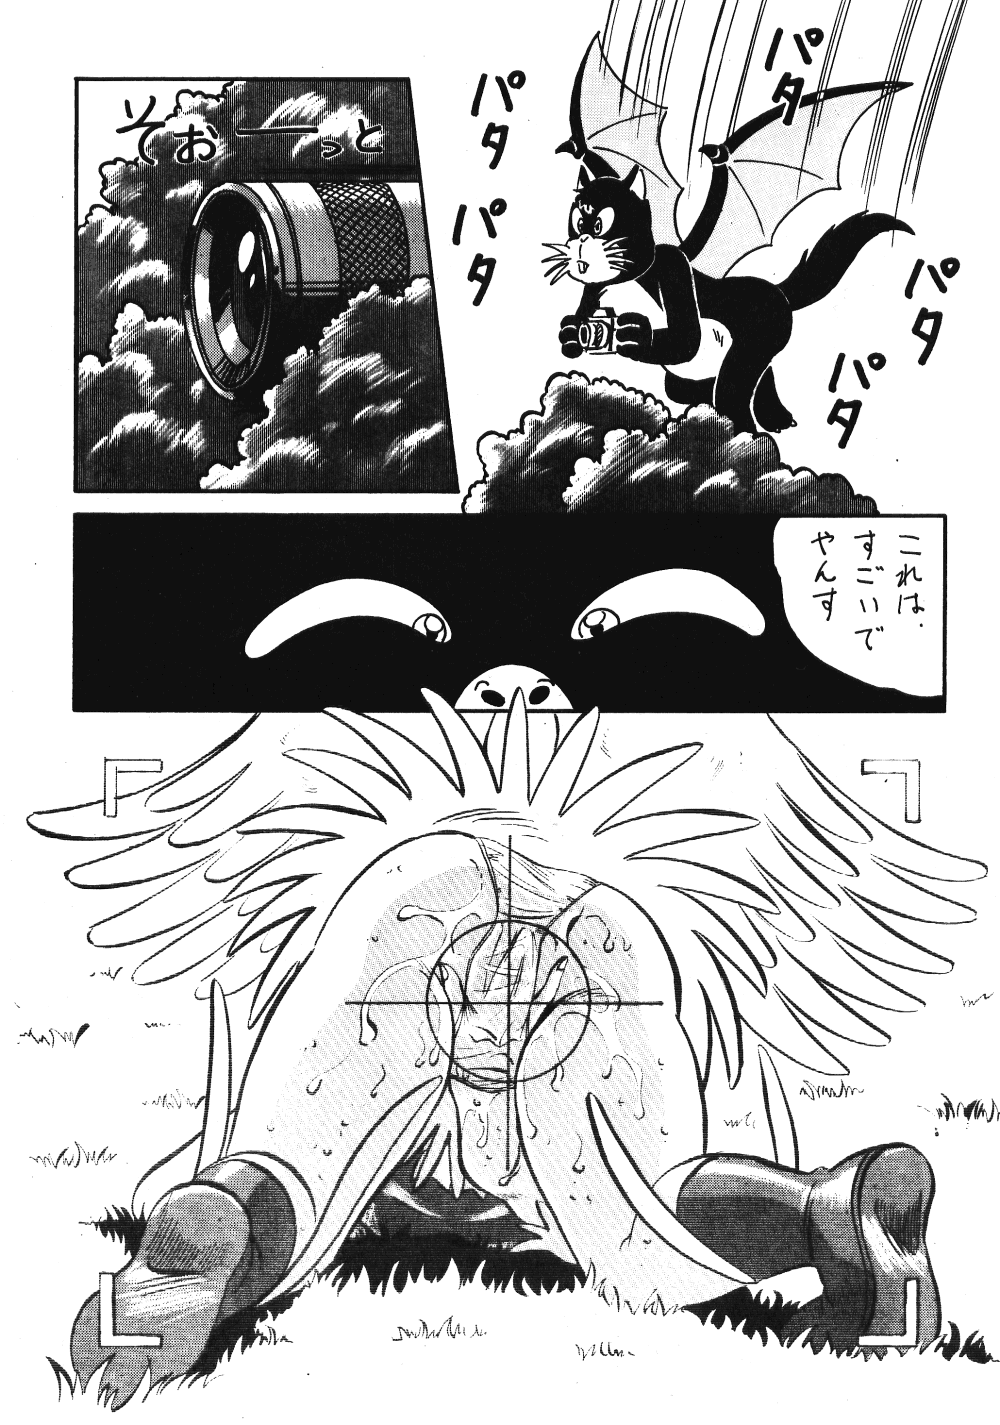 [ALPS (Various)] LOOK OUT 21 (Various) page 46 full